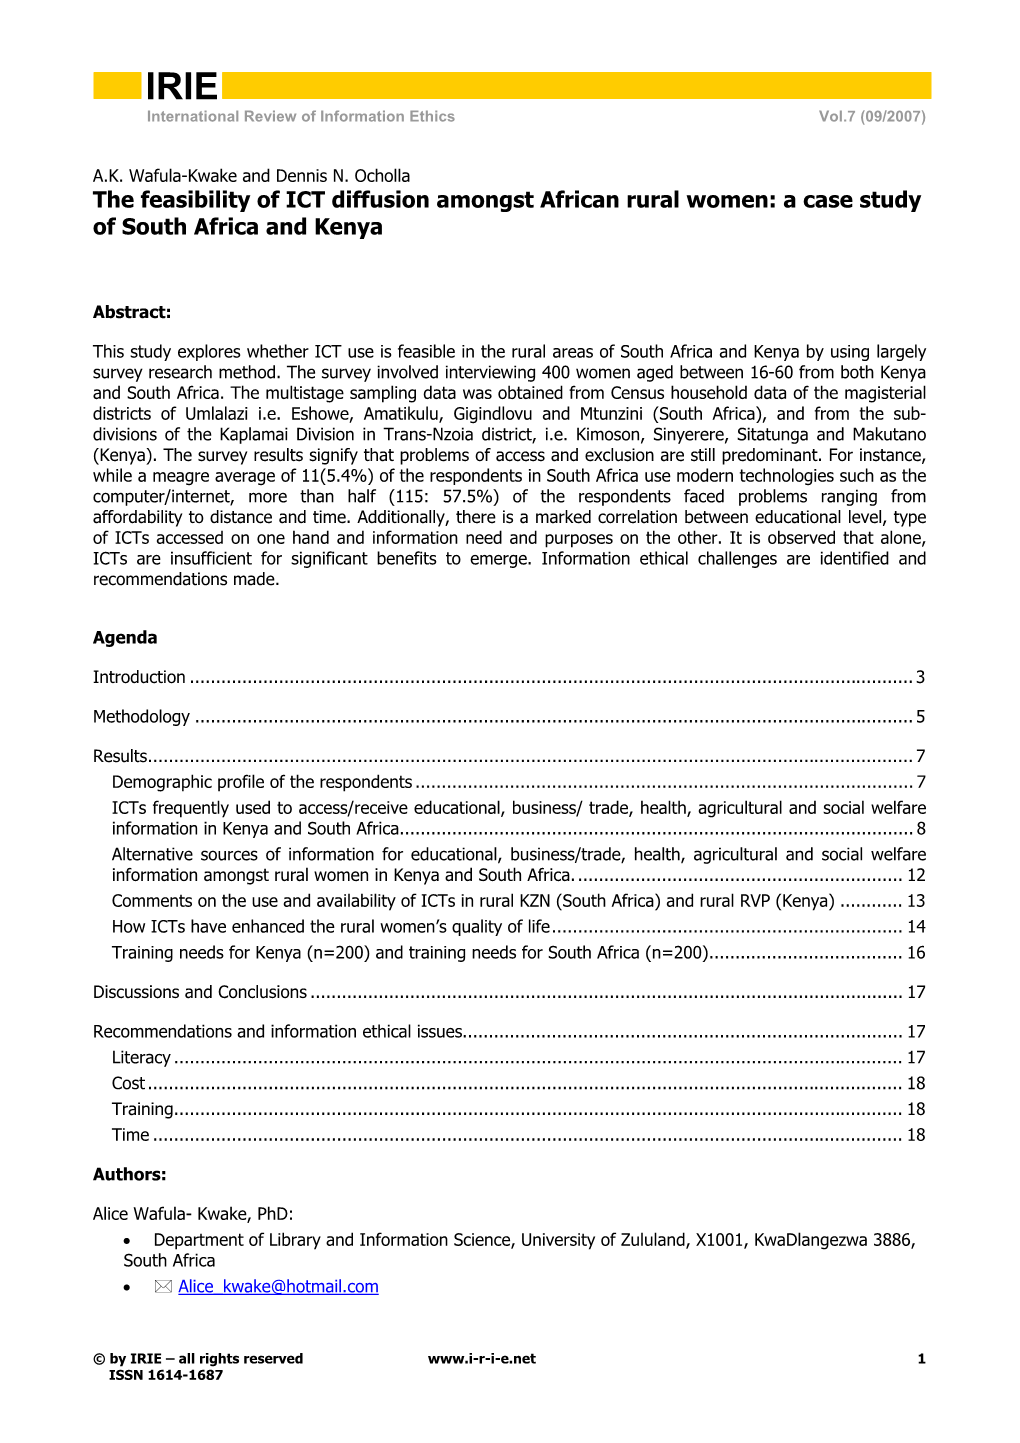 The Feasibility of ICT Diffusion Amongst African Rural Women: a Case Study of South Africa and Kenya